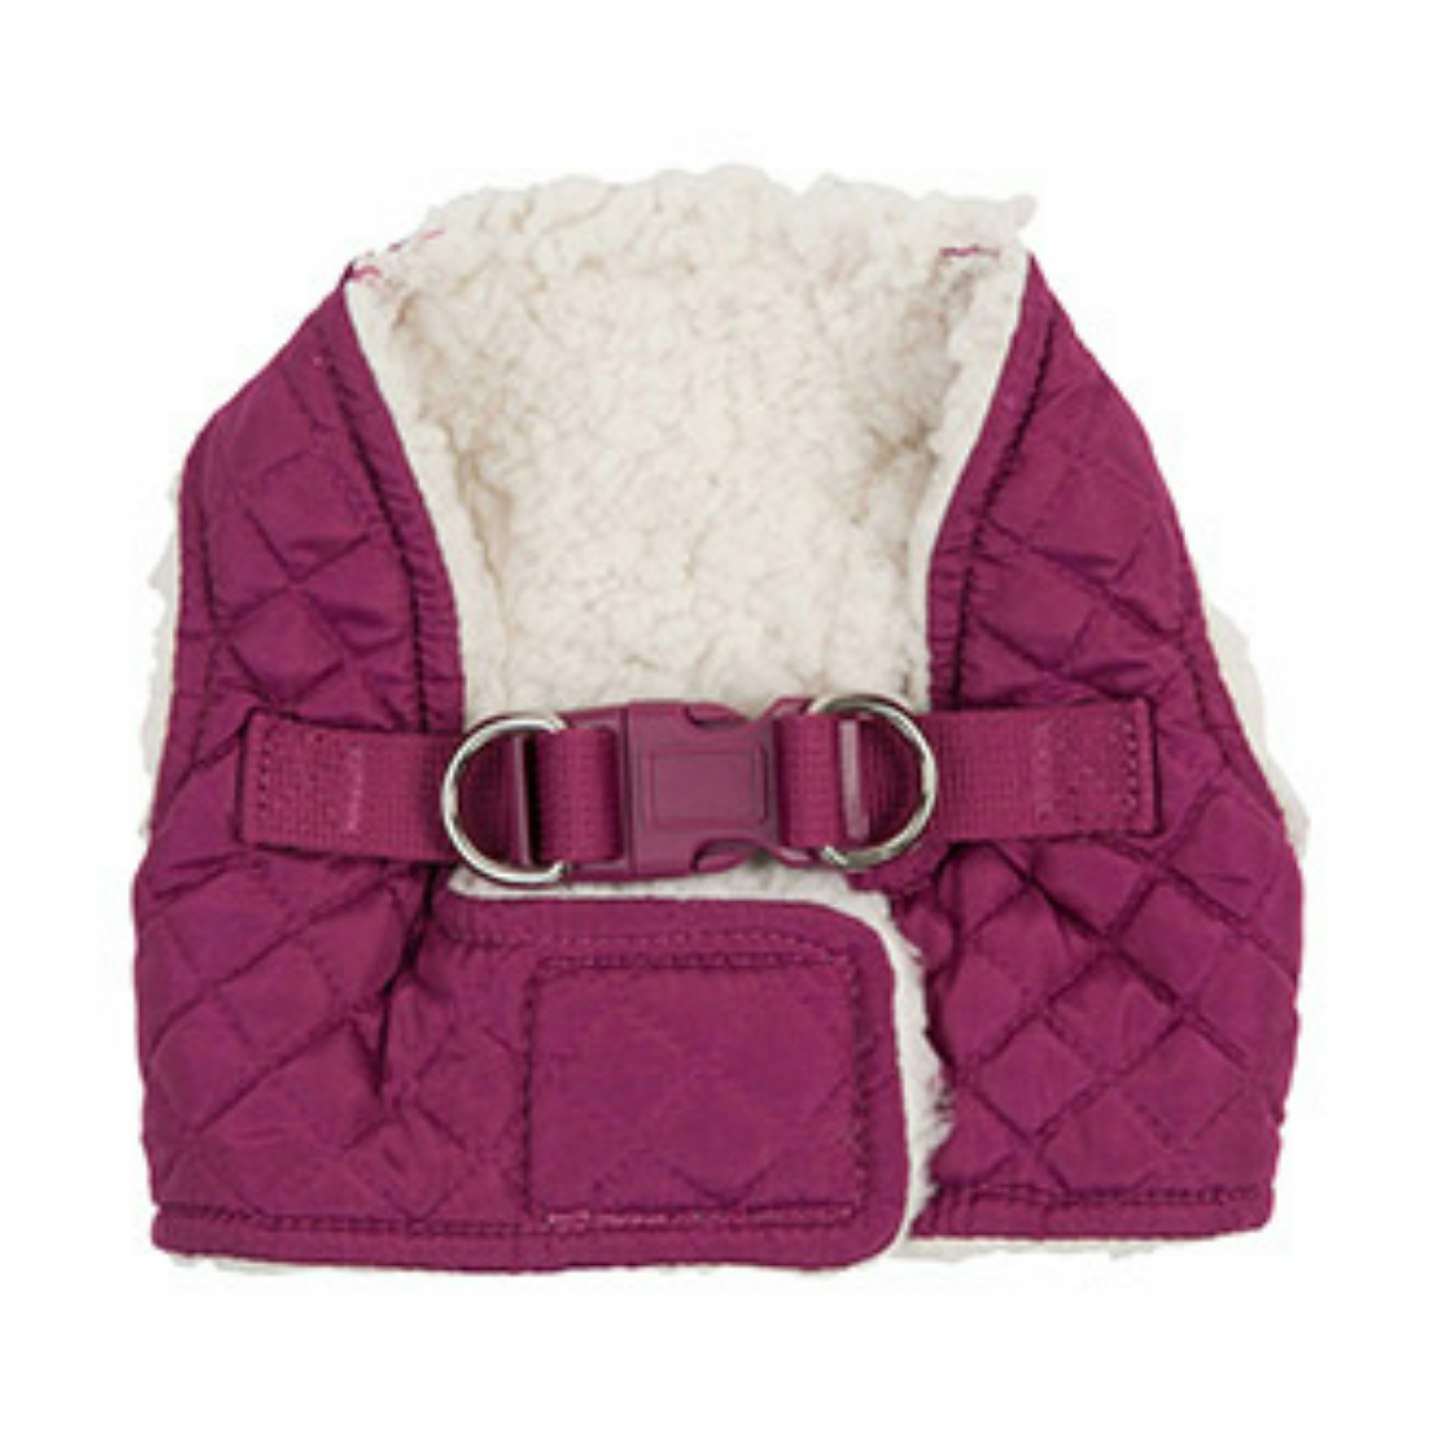 Wag-a-Tude Quilted Dog Harness